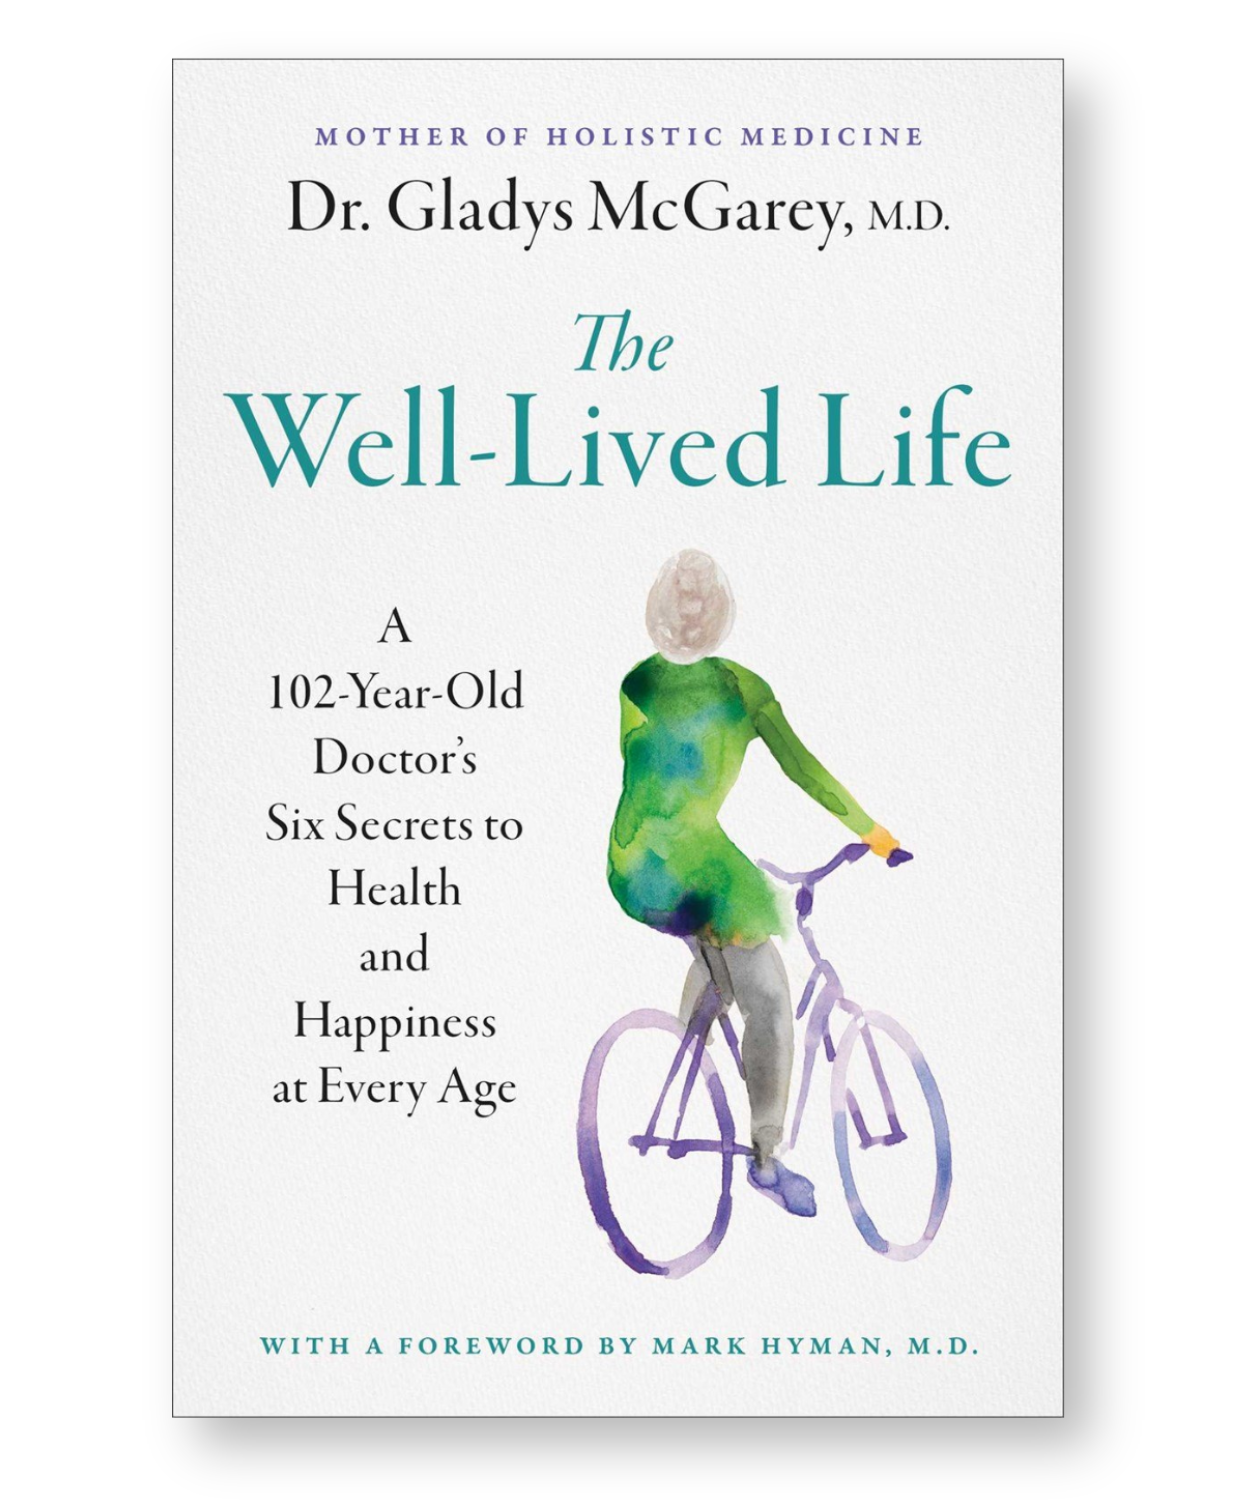 The Well-Lived Life Paperback version cover image